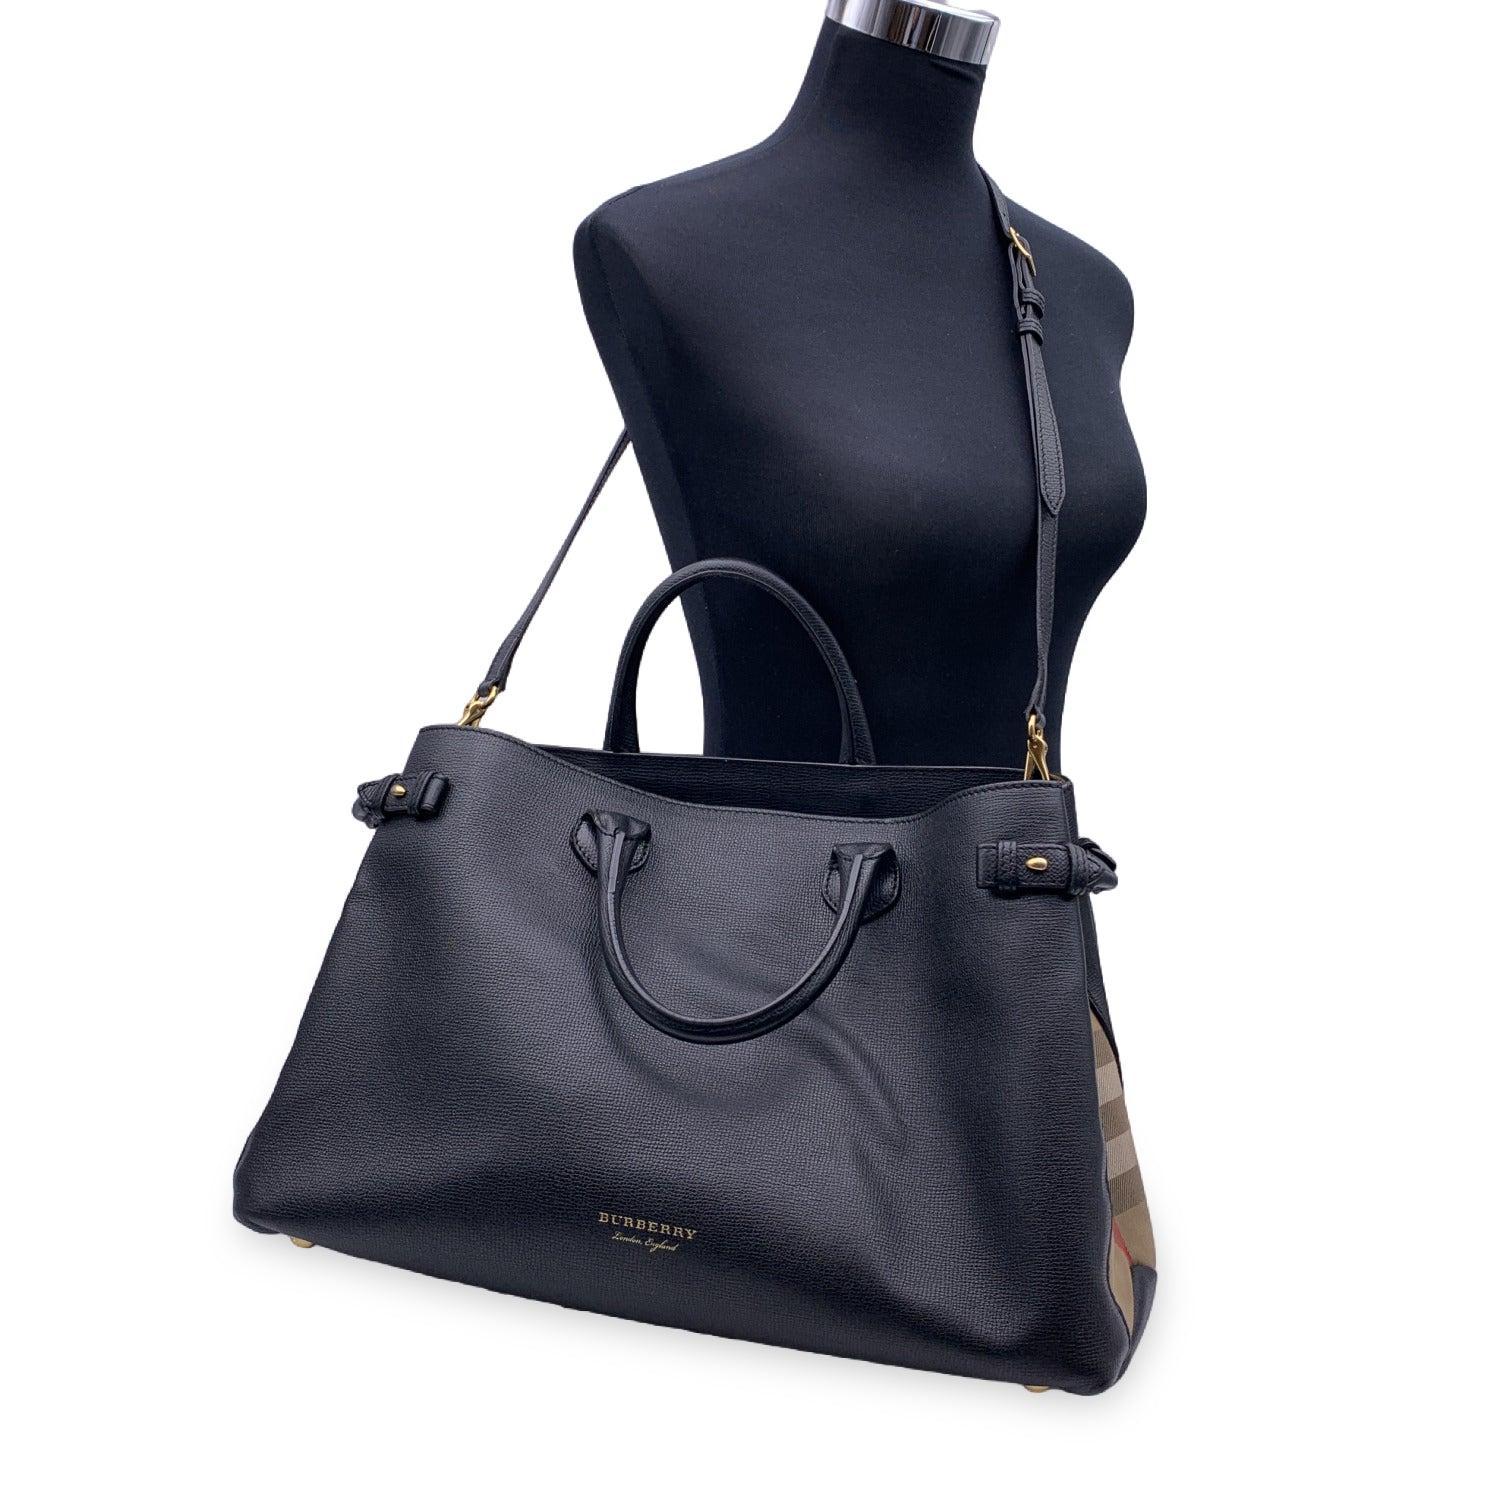 Burberry Black Leather The Banner Tote Bag Satchel with Strap In Good Condition In Rome, Rome